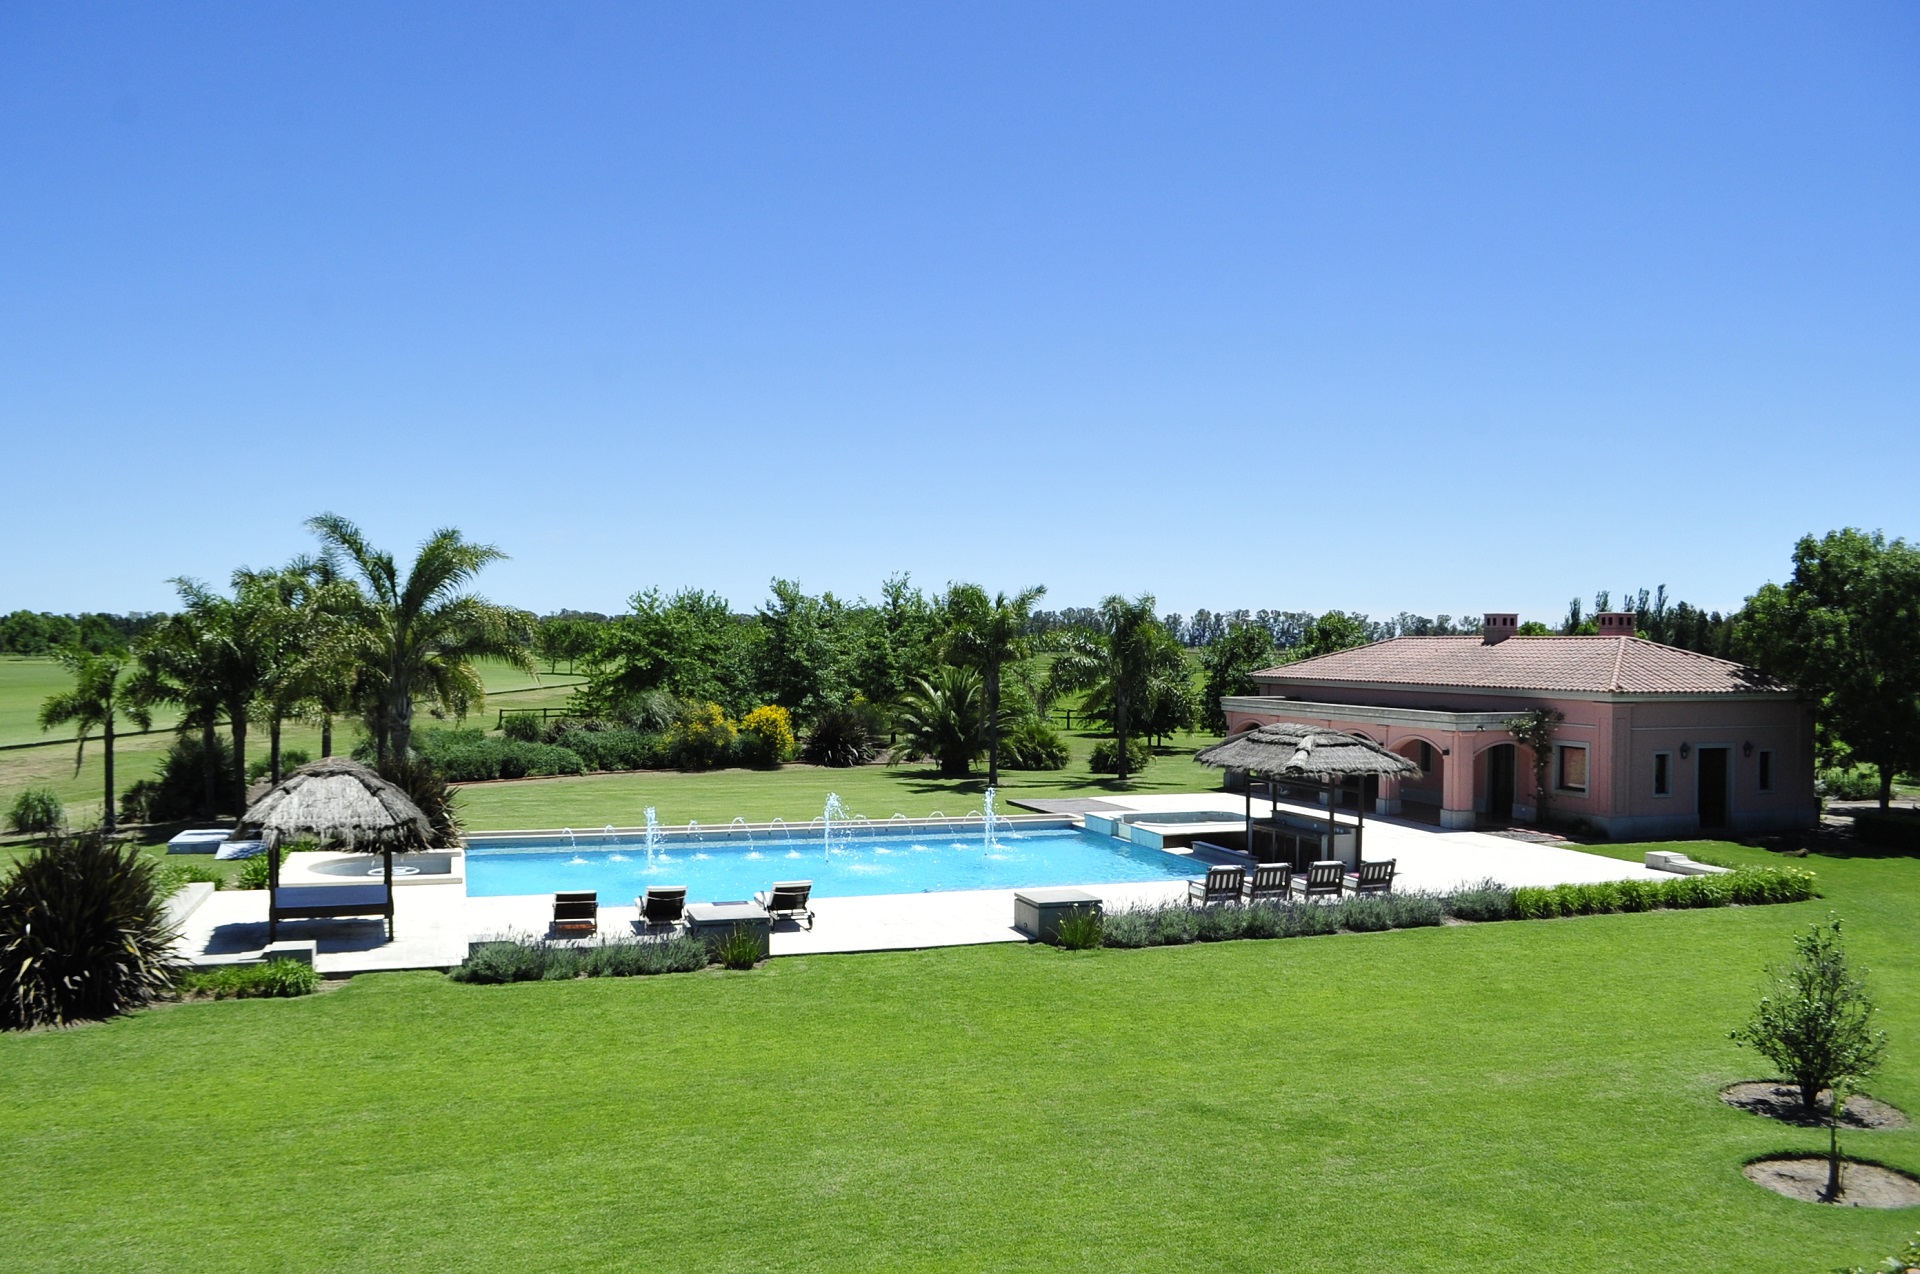 In exclusive Santa María de Lobos Polo Club, 100 km (62 mi) from Buenos Aires and a 40-minute drive from Ezeiza Airport.